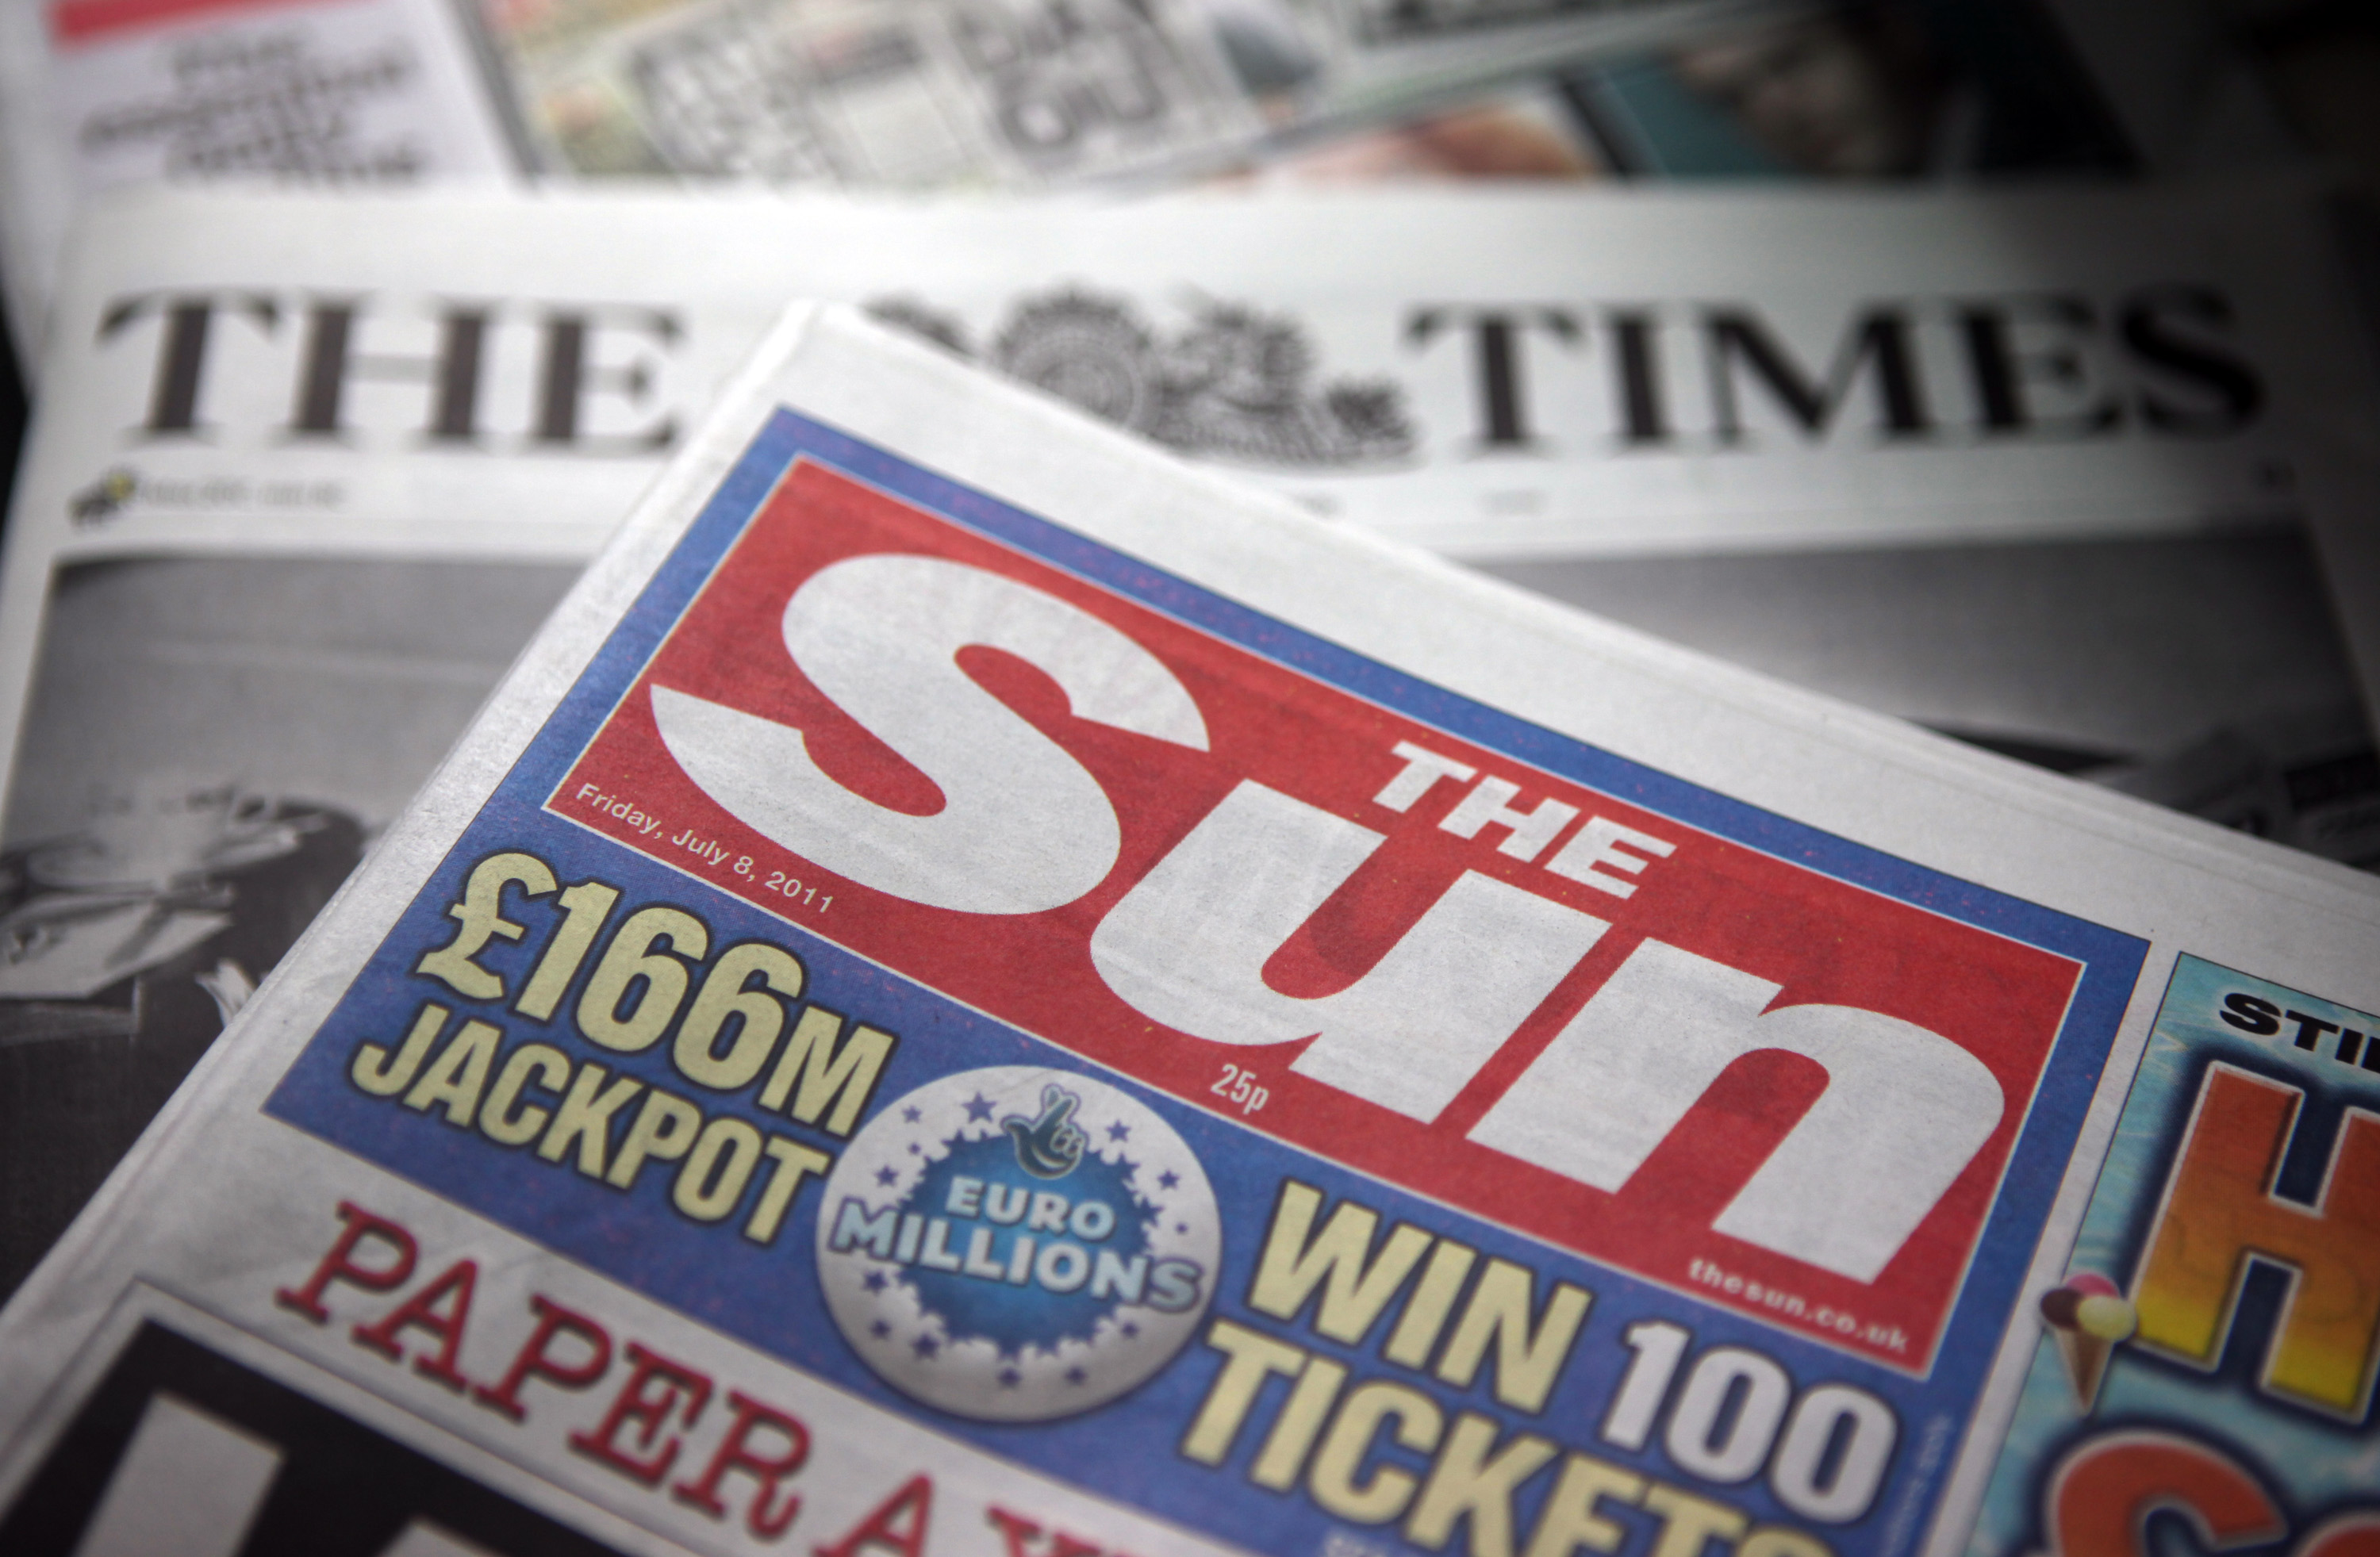 A copy of the <i>Sun</i> and the <i>Times</i> newspapers, published by News International are seen on display at a news agent in London on  July 8, 2011 (Bloomberg/Getty Images)